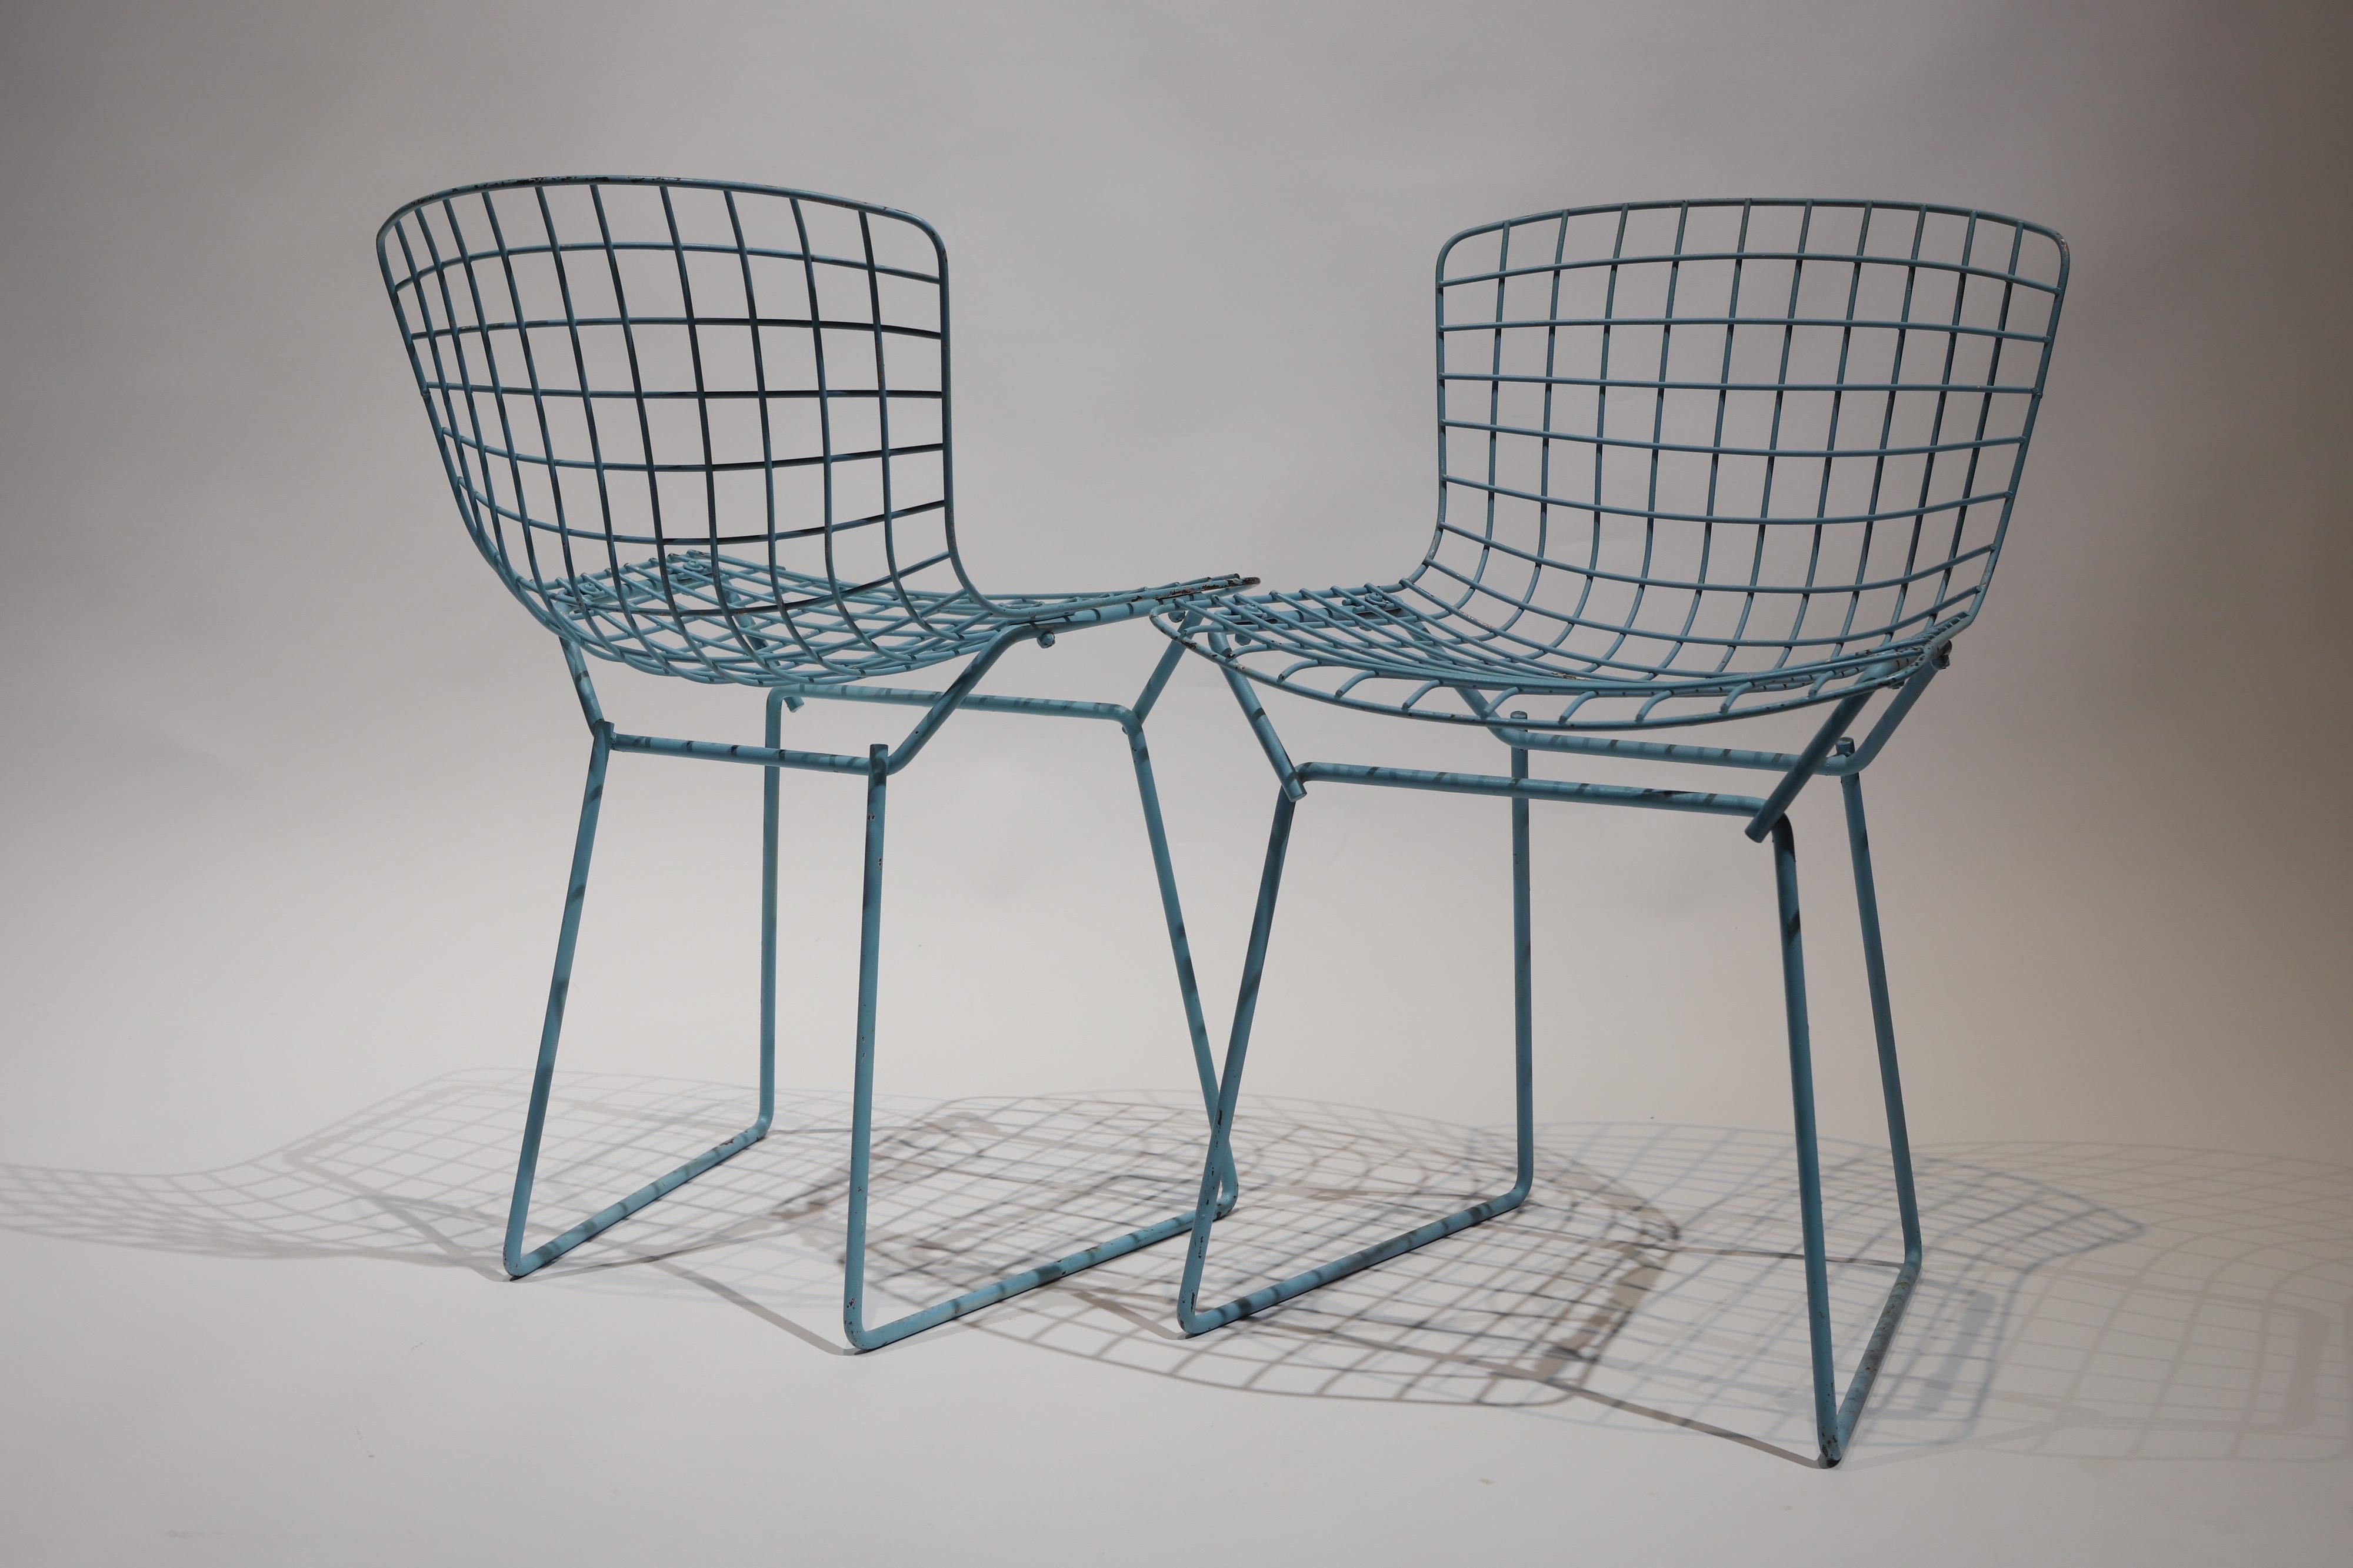 Wonderful set of child sized side chairs designed by Harry Bertoia for Knoll. Set was painted light blue at one point and have a wonderful patina. Pictured with Herman Miller fiberglass armchair by Charles and Ray Eames for scale.